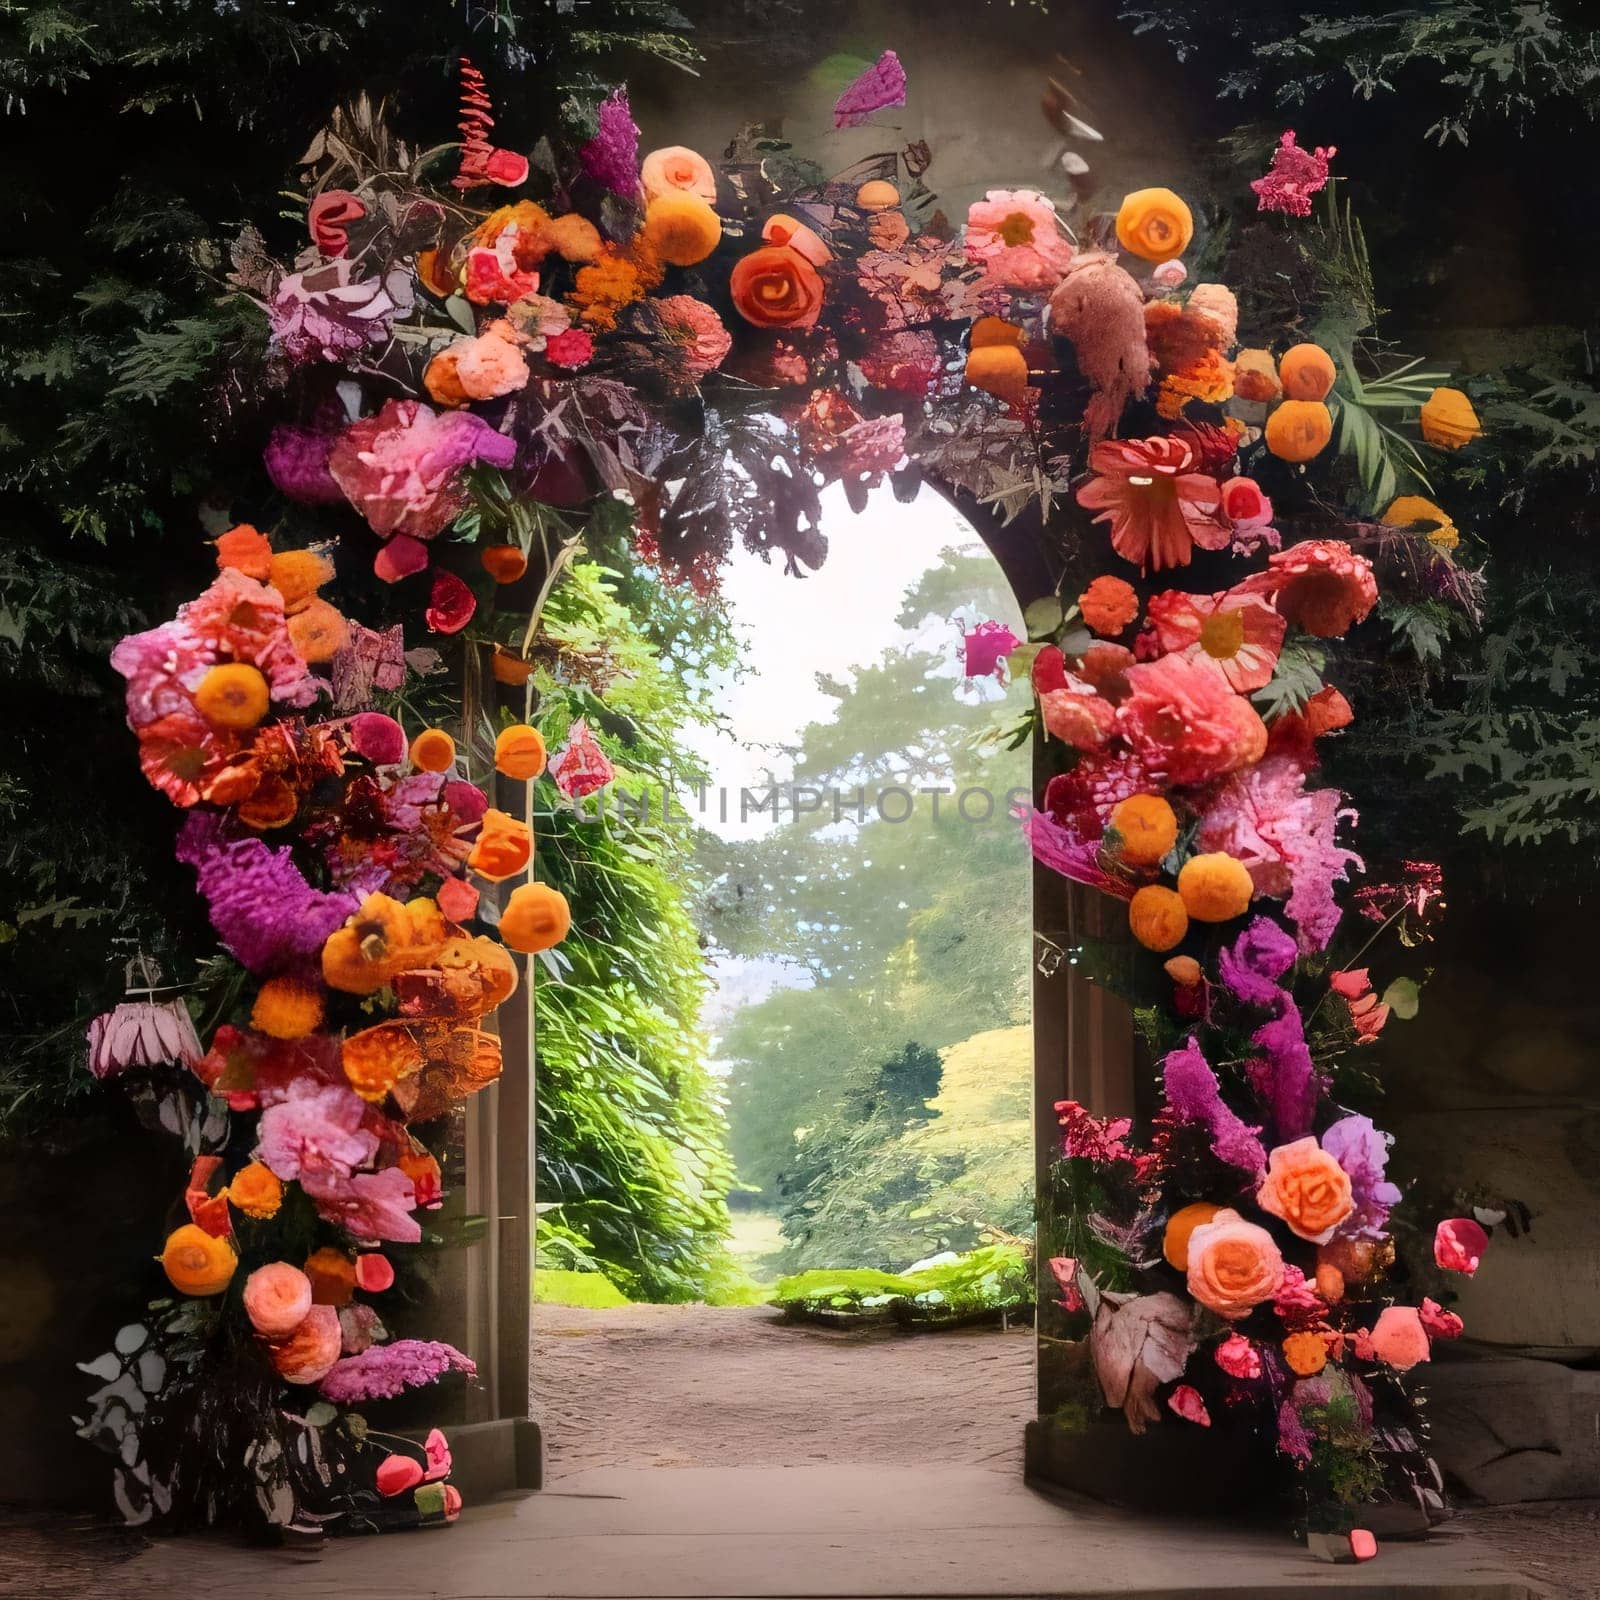 Colorful roses decorating the gate to the garden. Flowering flowers, a symbol of spring, new life. by ThemesS